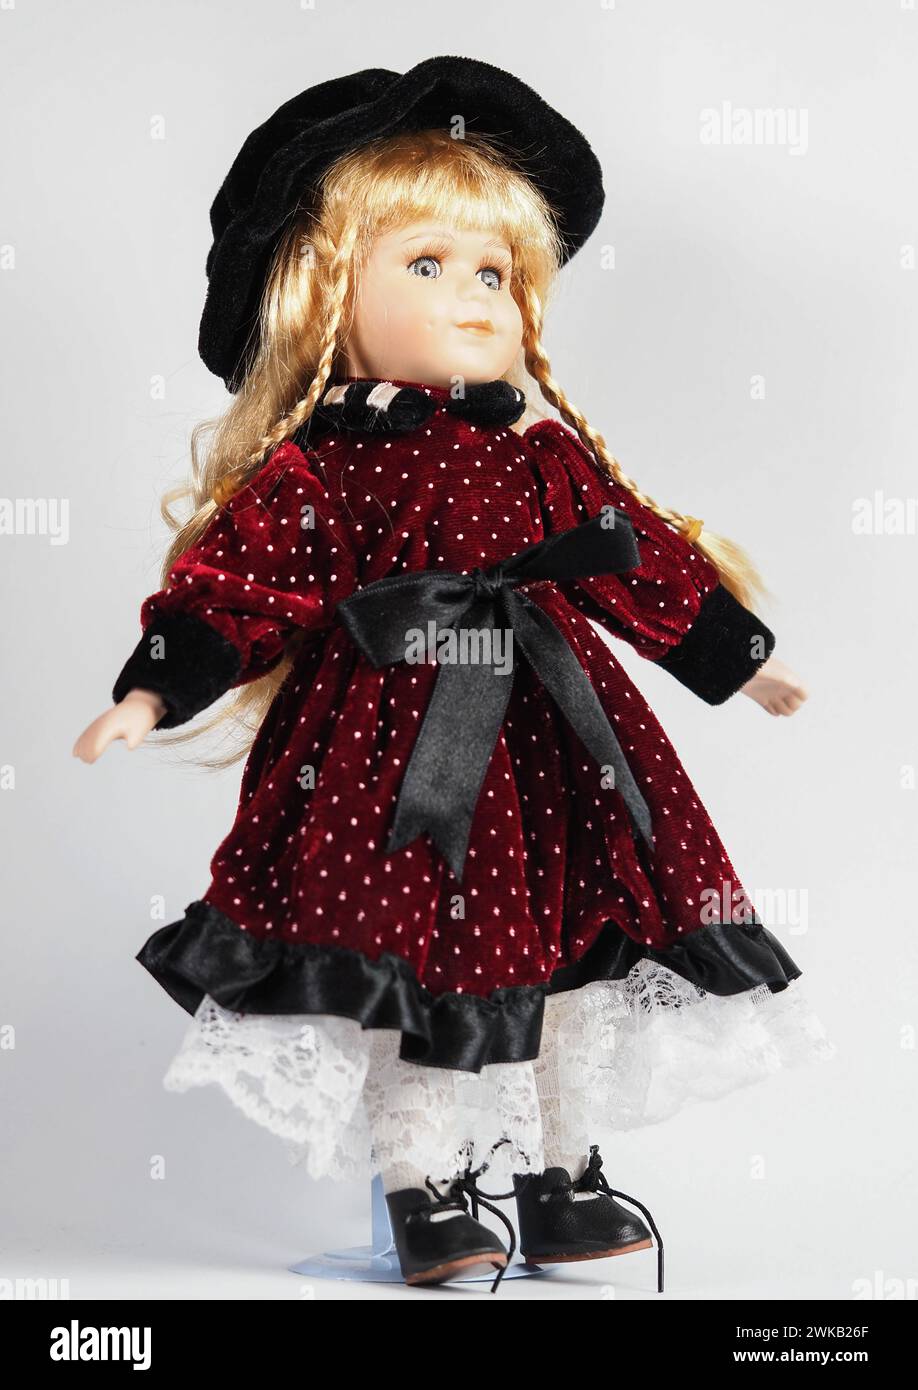 Vintage Austrian porcelain doll girl with blue eyes, blonde with braids, wearing a dark red velvet dress with white polka dots with a black satin belt Stock Photo